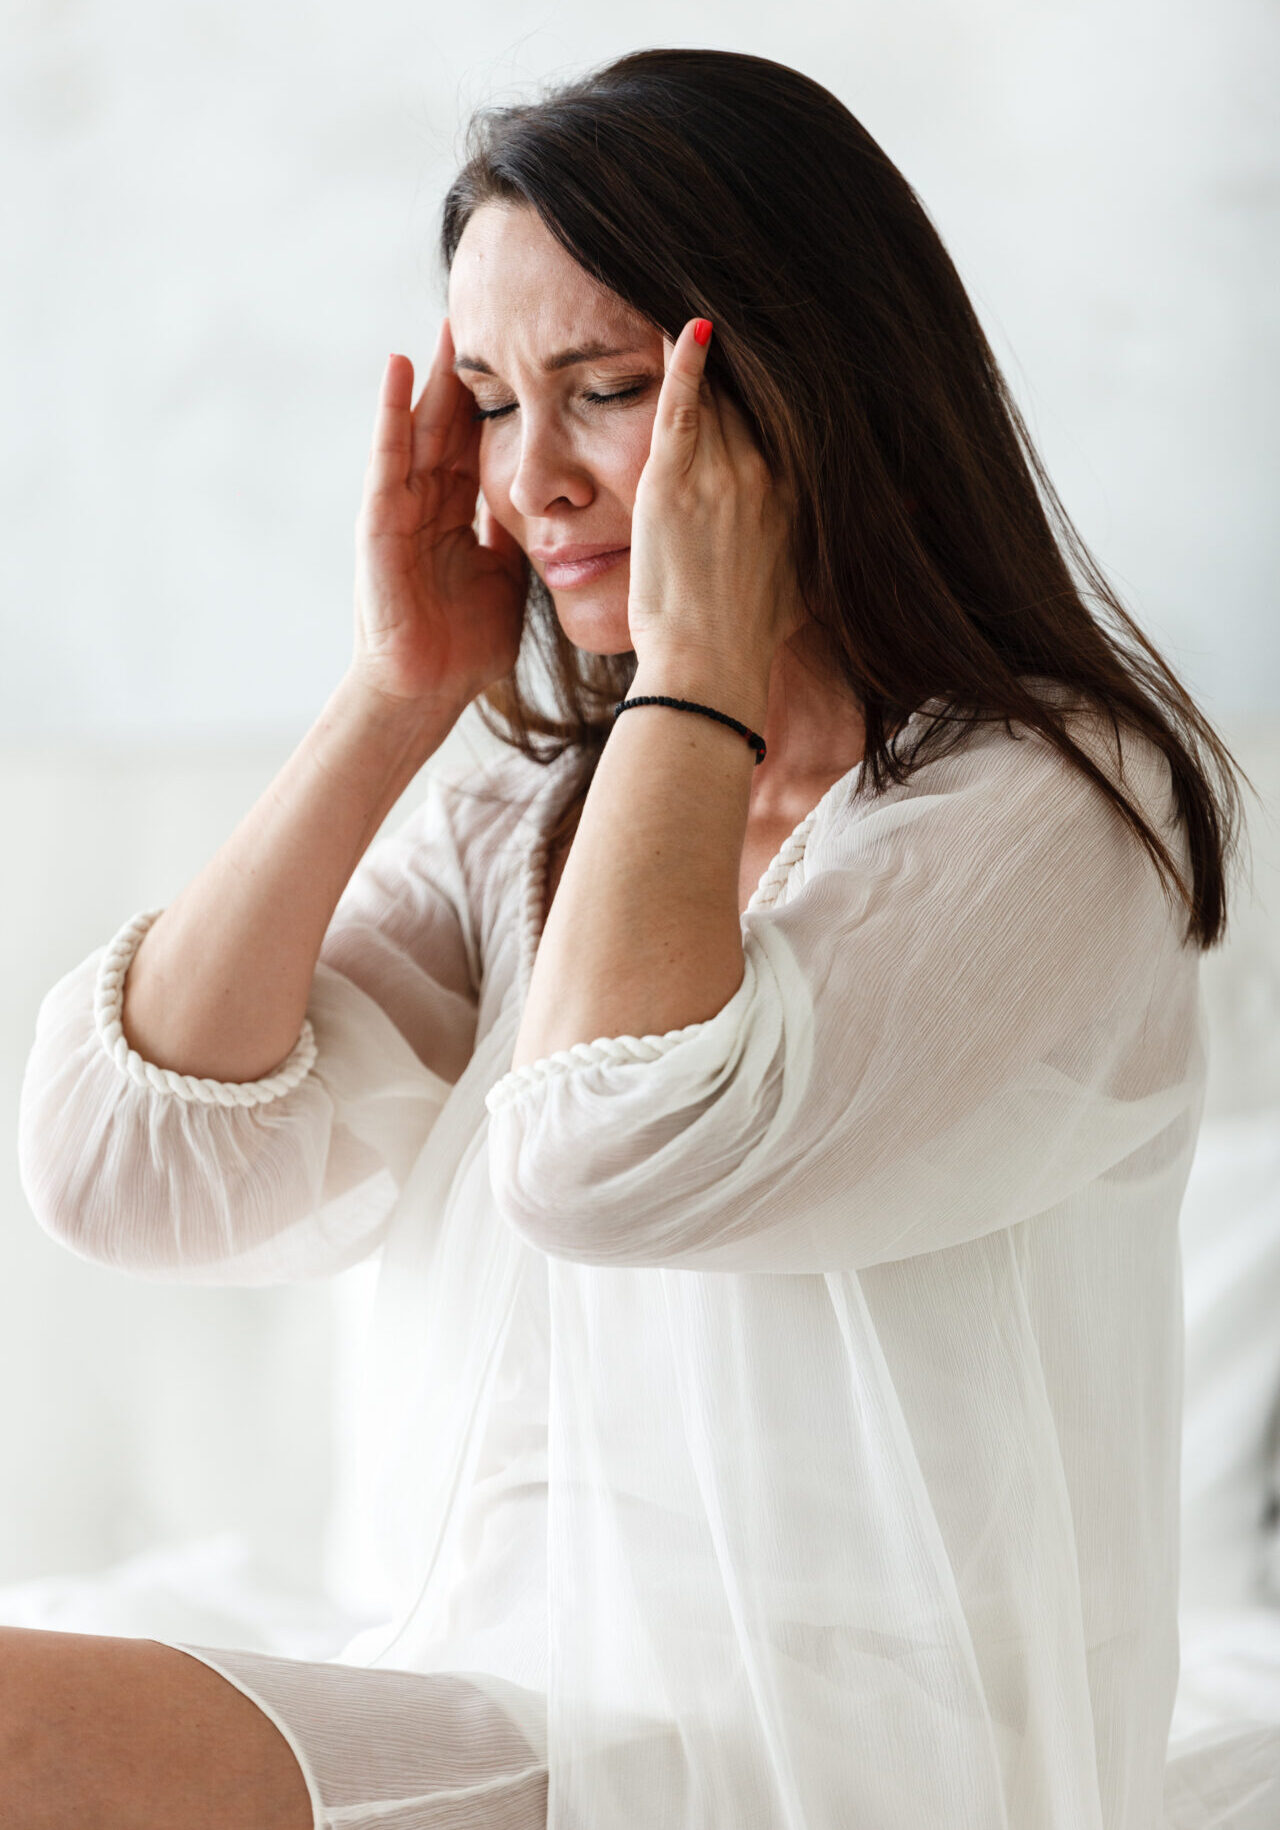 Middle aged woman sitting on a white bed in a bedroom at home touching her head with her hands while having a headache pain and feeling unwell. Suffering from insomnia or migraine.